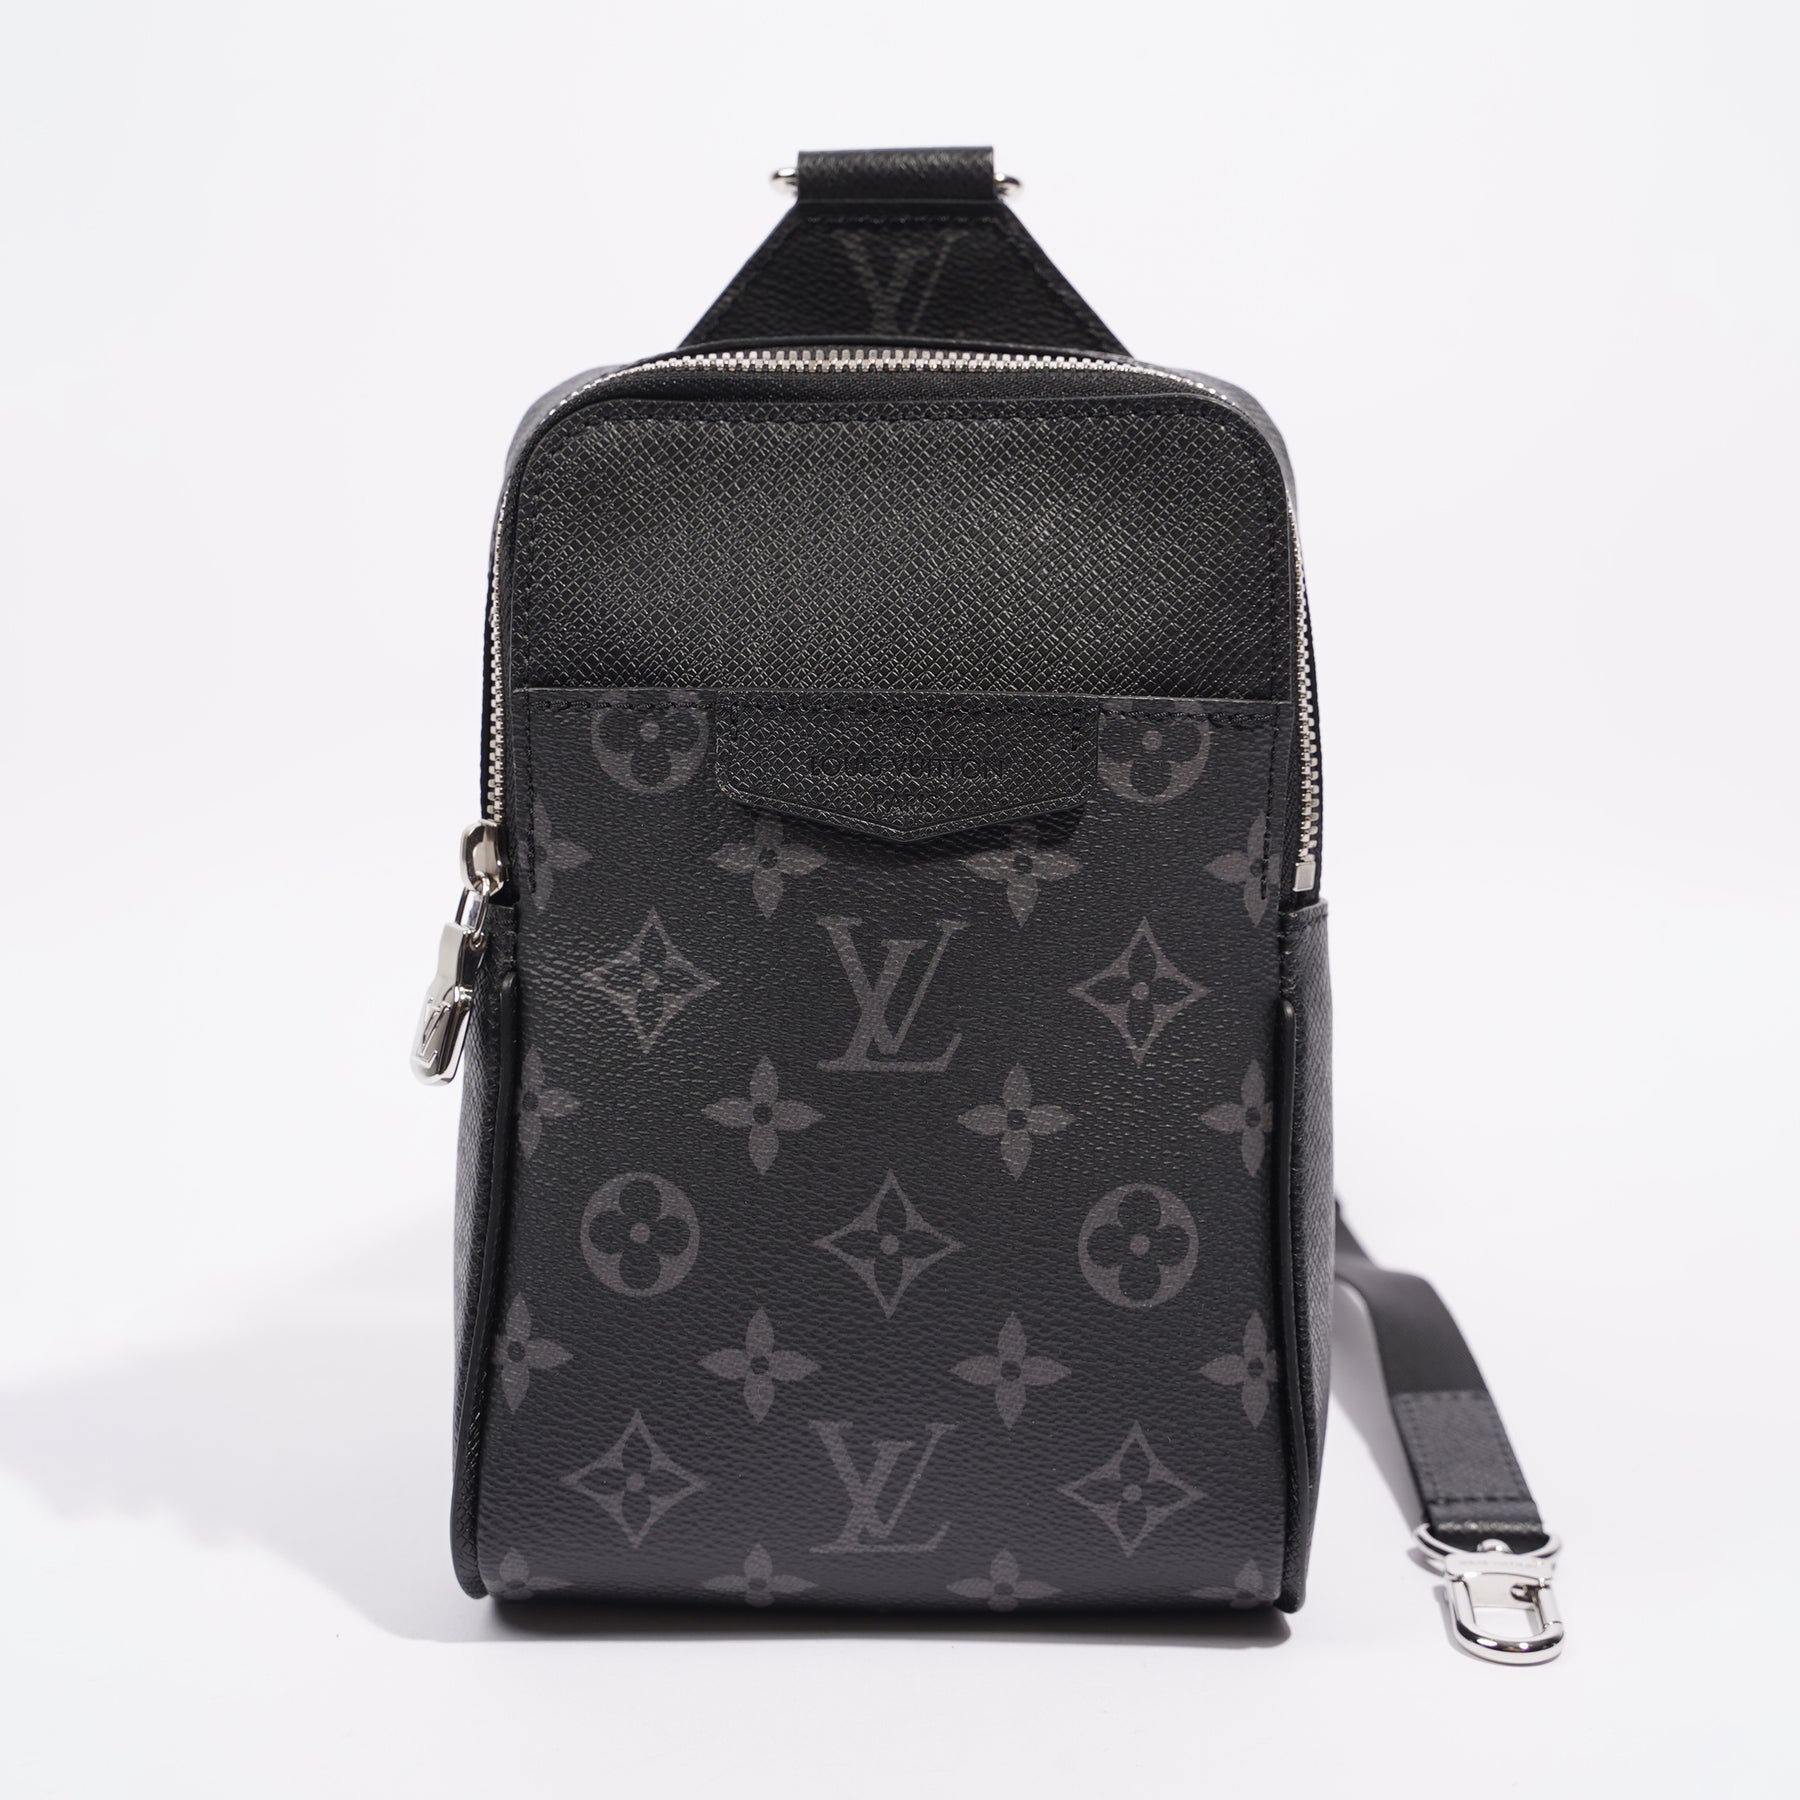 Louis Vuitton Men Bags And Accessories